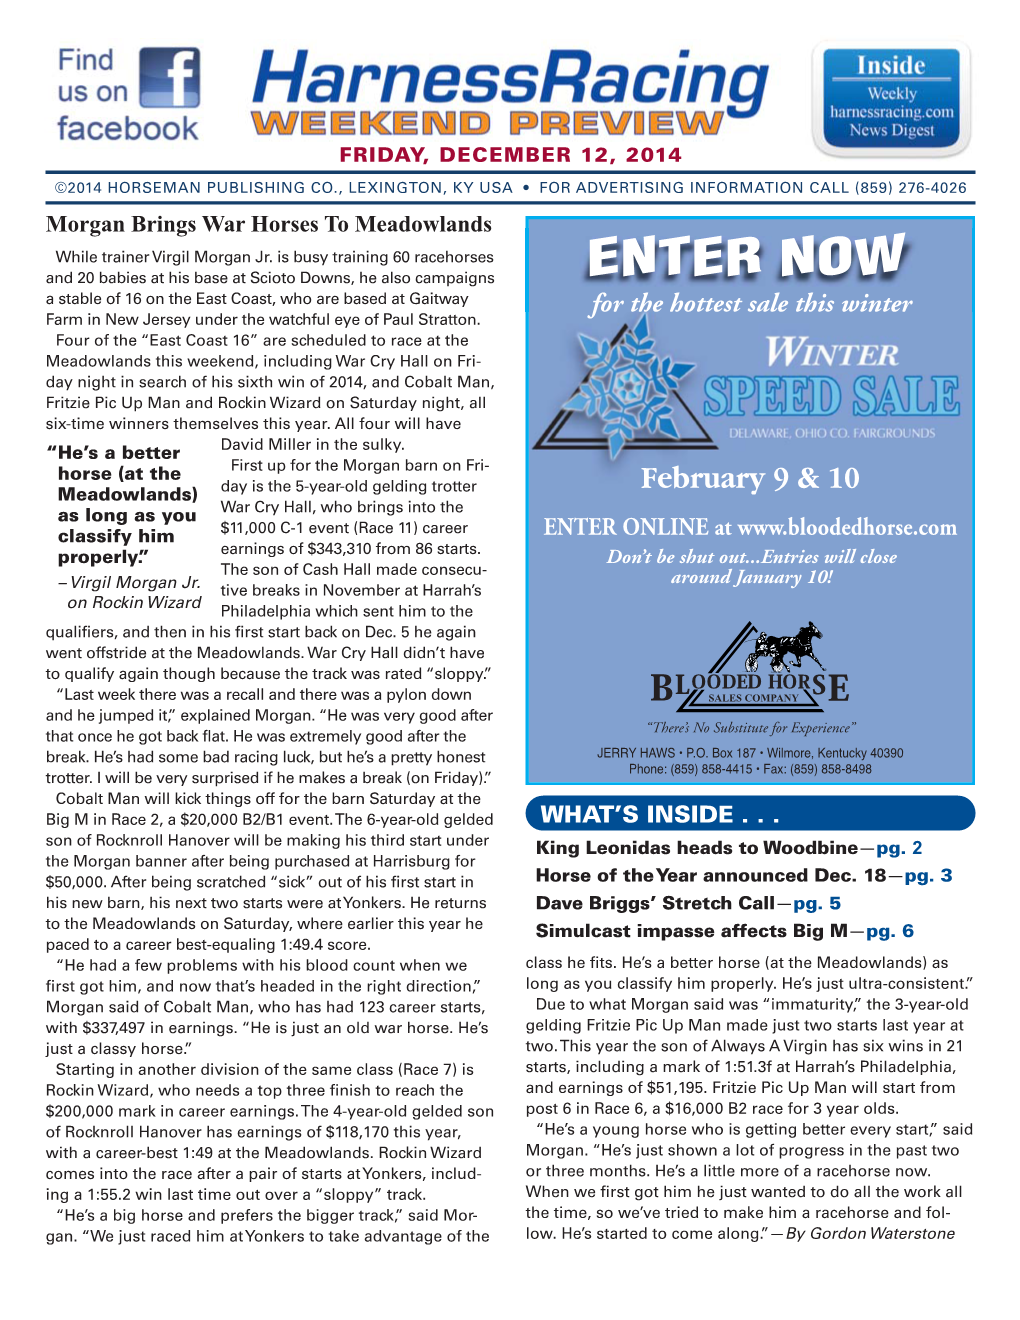 ENTER NOW a Stable of 16 on the East Coast, Who Are Based at Gaitway for the Hottest Sale This Winter Farm in New Jersey Under the Watchful Eye of Paul Stratton